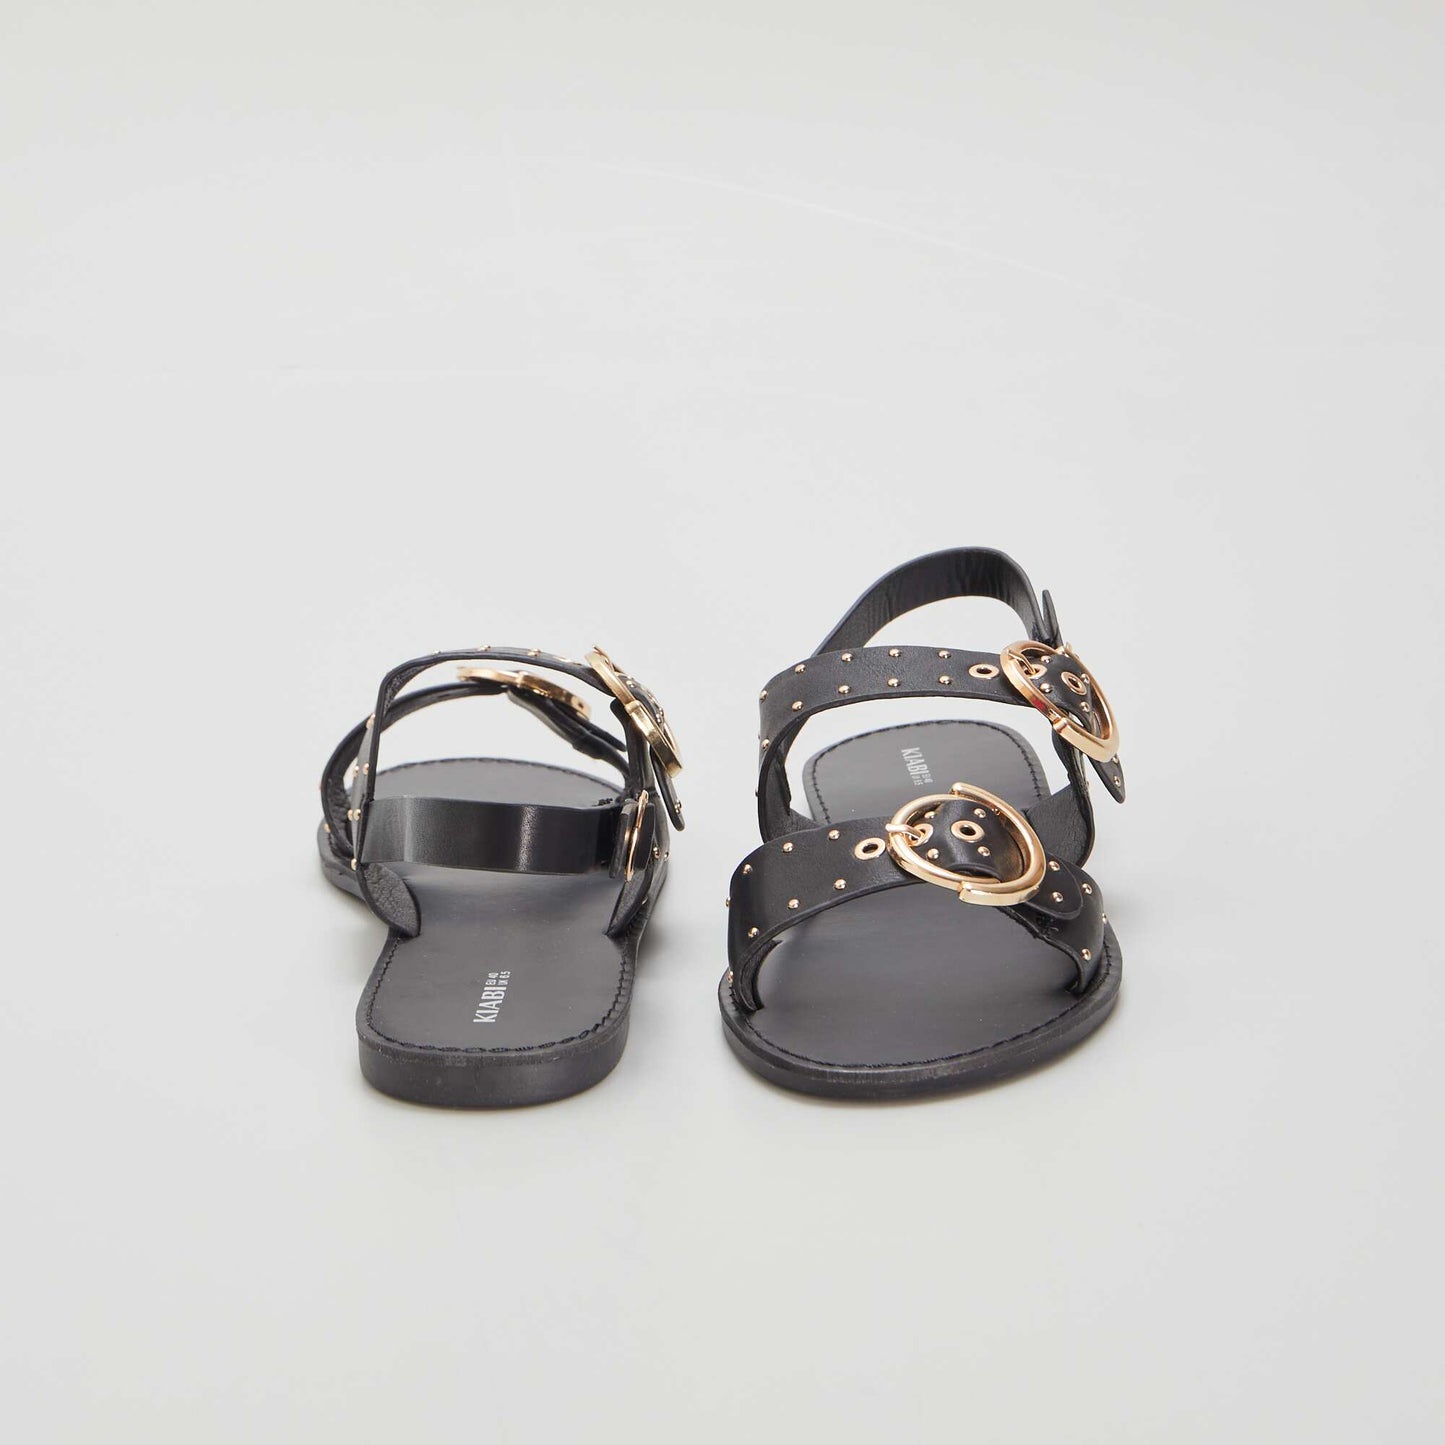 Sandals with studded straps black